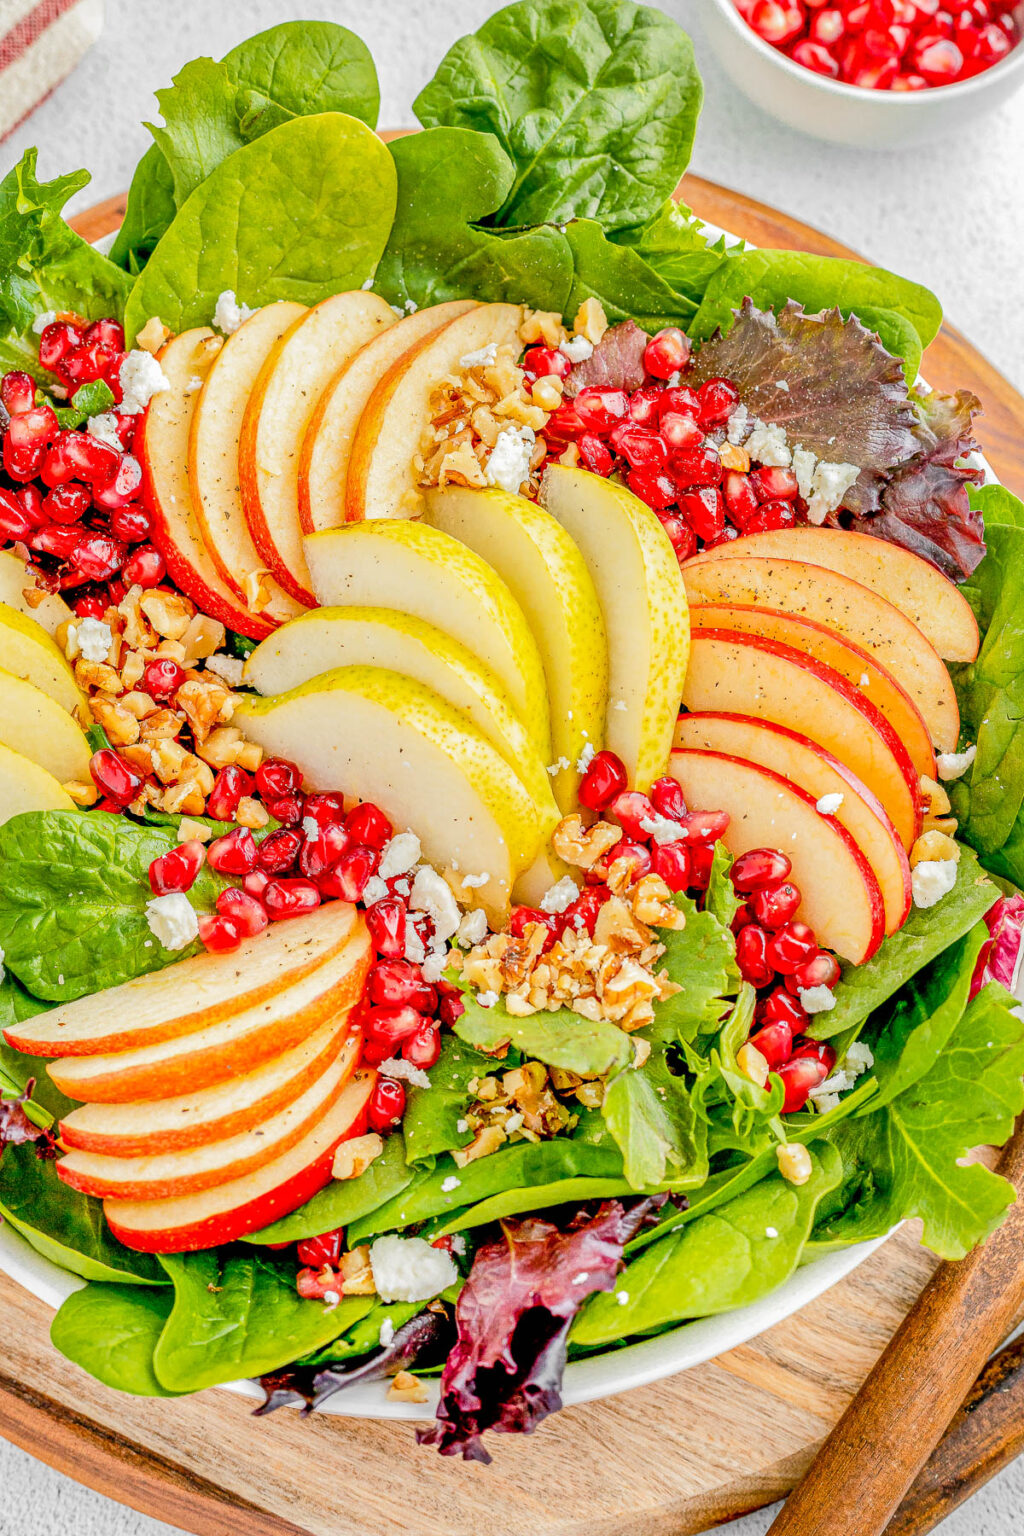 Fall Harvest Salad with Apples and Pears - Averie Cooks